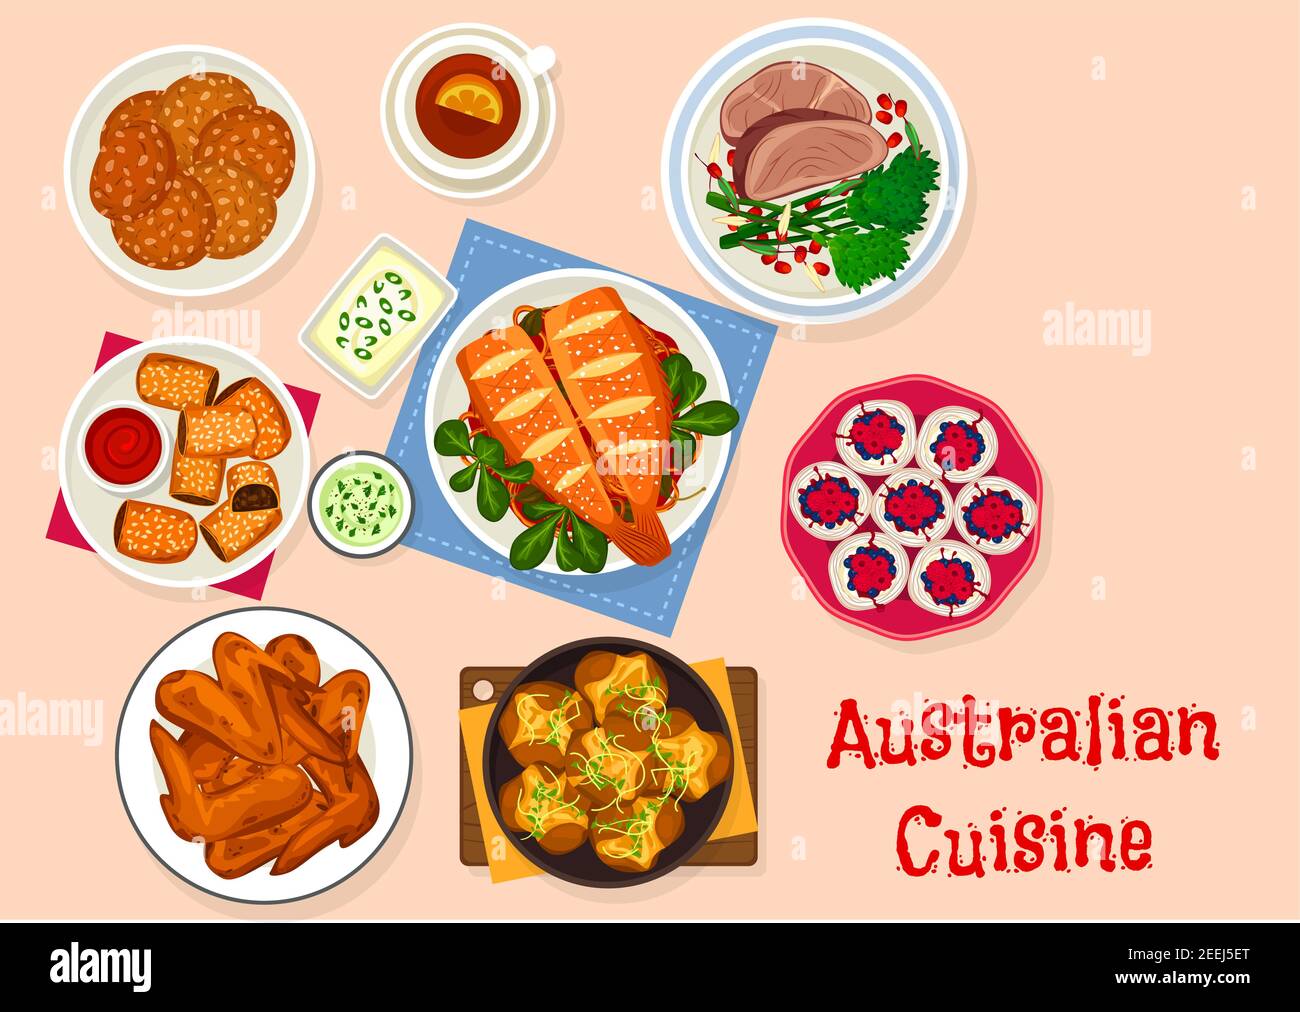 Australian cuisine traditional food icon with bbq chicken wings, beef steak, baked fish with vegetable, baked potato with herbs, lamb pie, meringue be Stock Vector